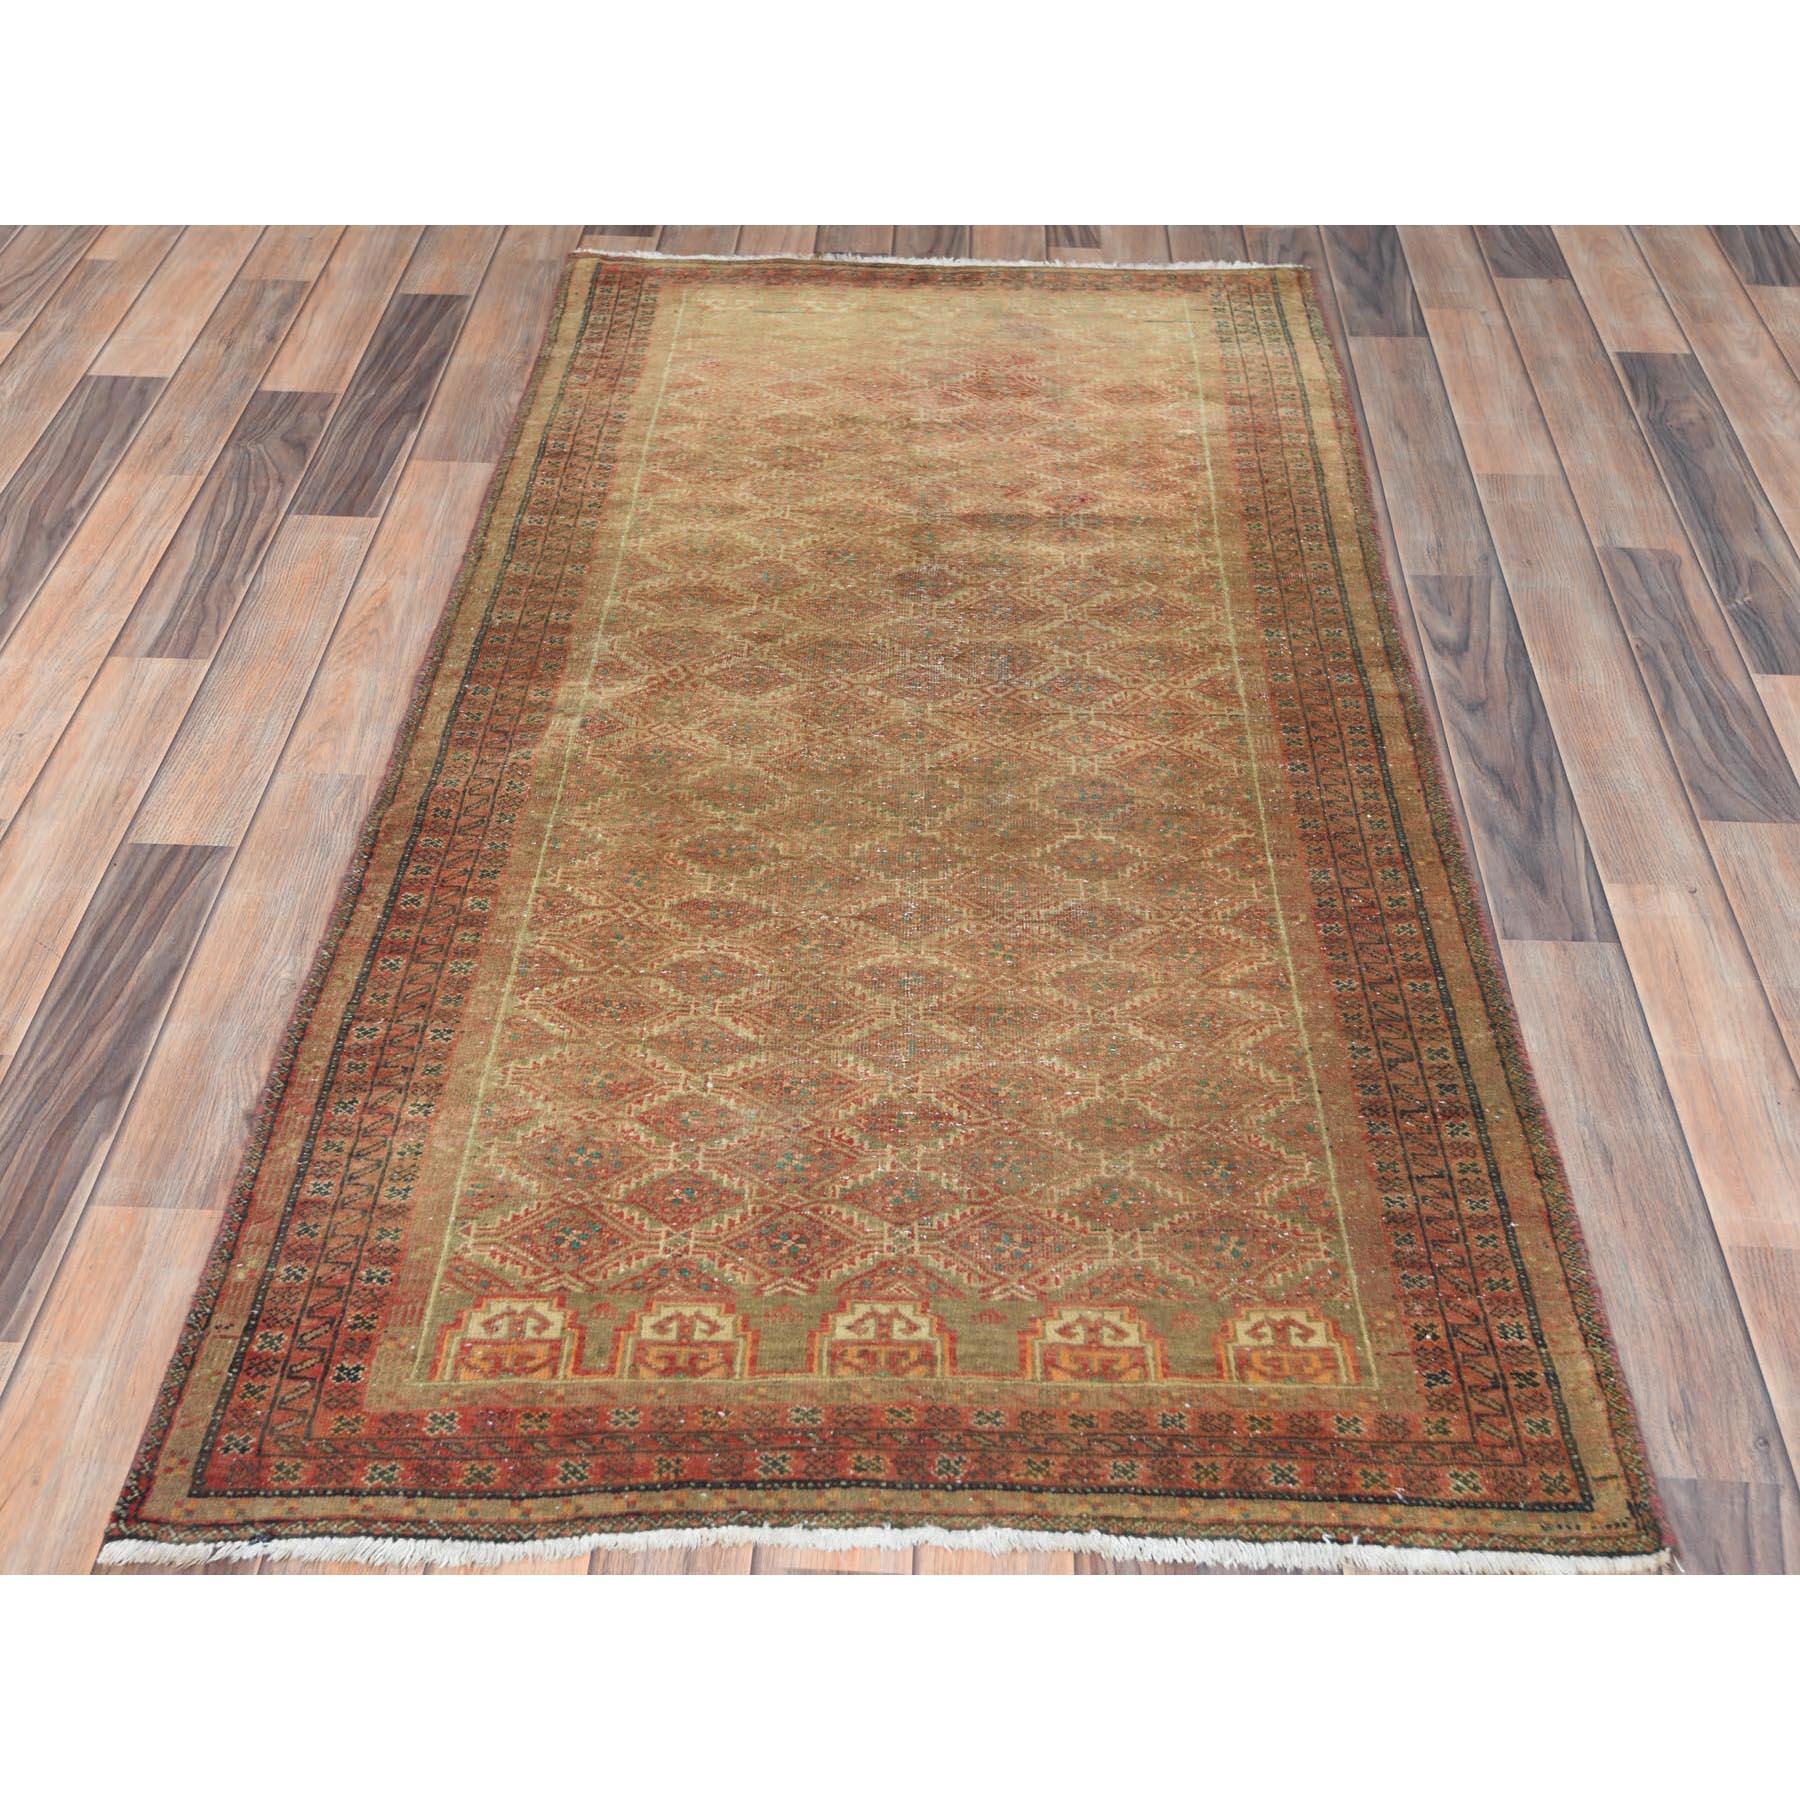 This fabulous Hand-Knotted carpet has been created and designed for extra strength and durability. This rug has been handcrafted for weeks in the traditional method that is used to makeExact Rug Size in Feet and Inches : 3'0